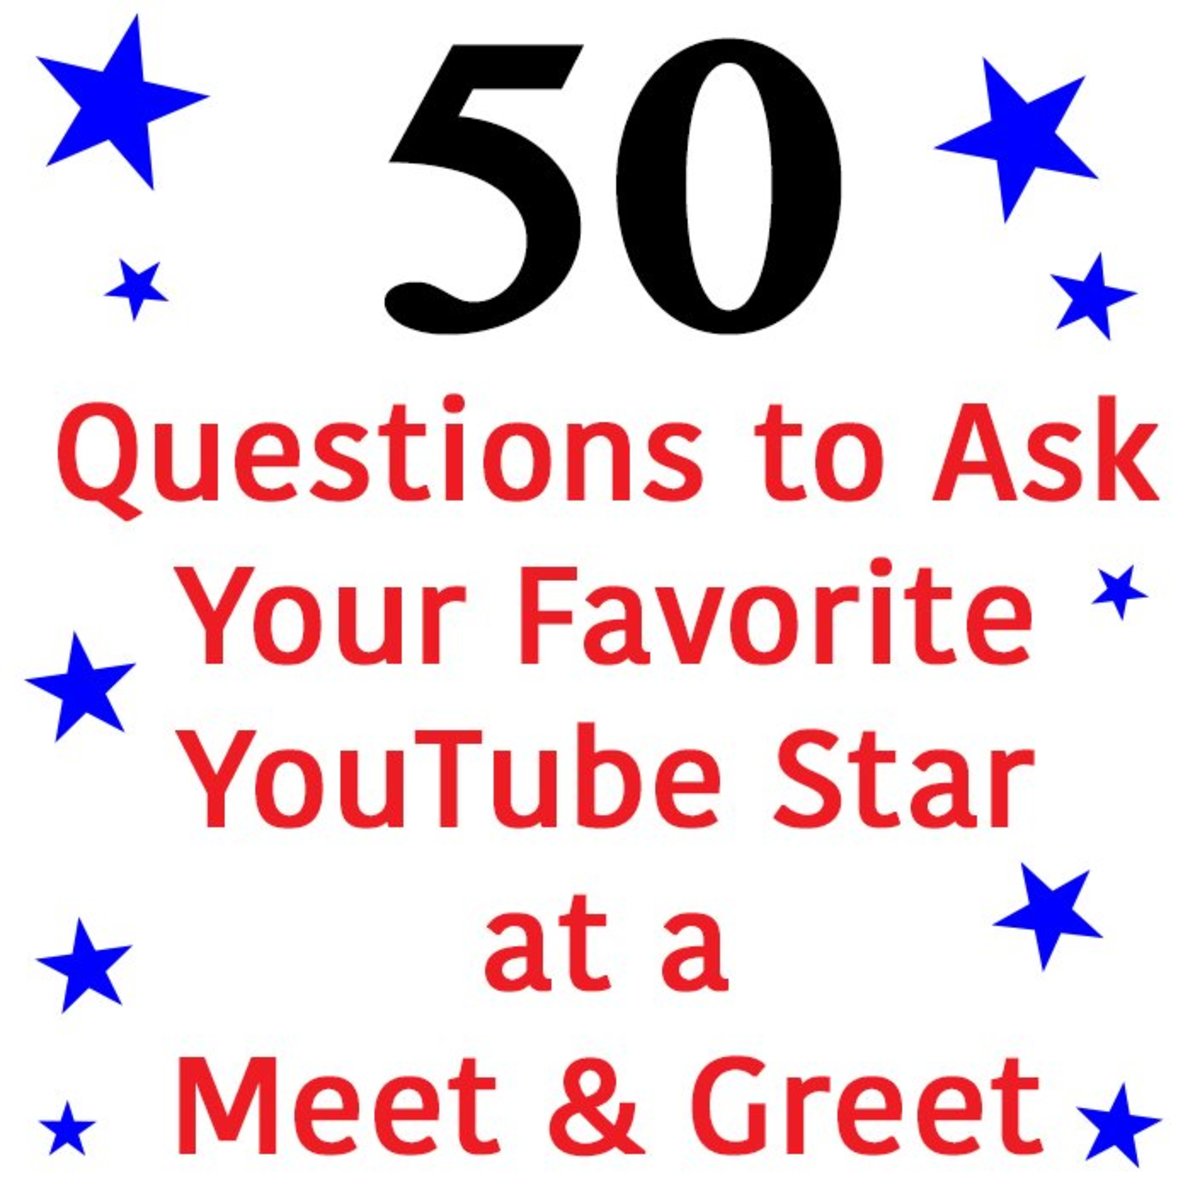 50 Questions To Ask Your Favorite Youtube Star At A Convention Or Meet And Greet Turbofuture Technology - met you in roblox 13 sub special youtube